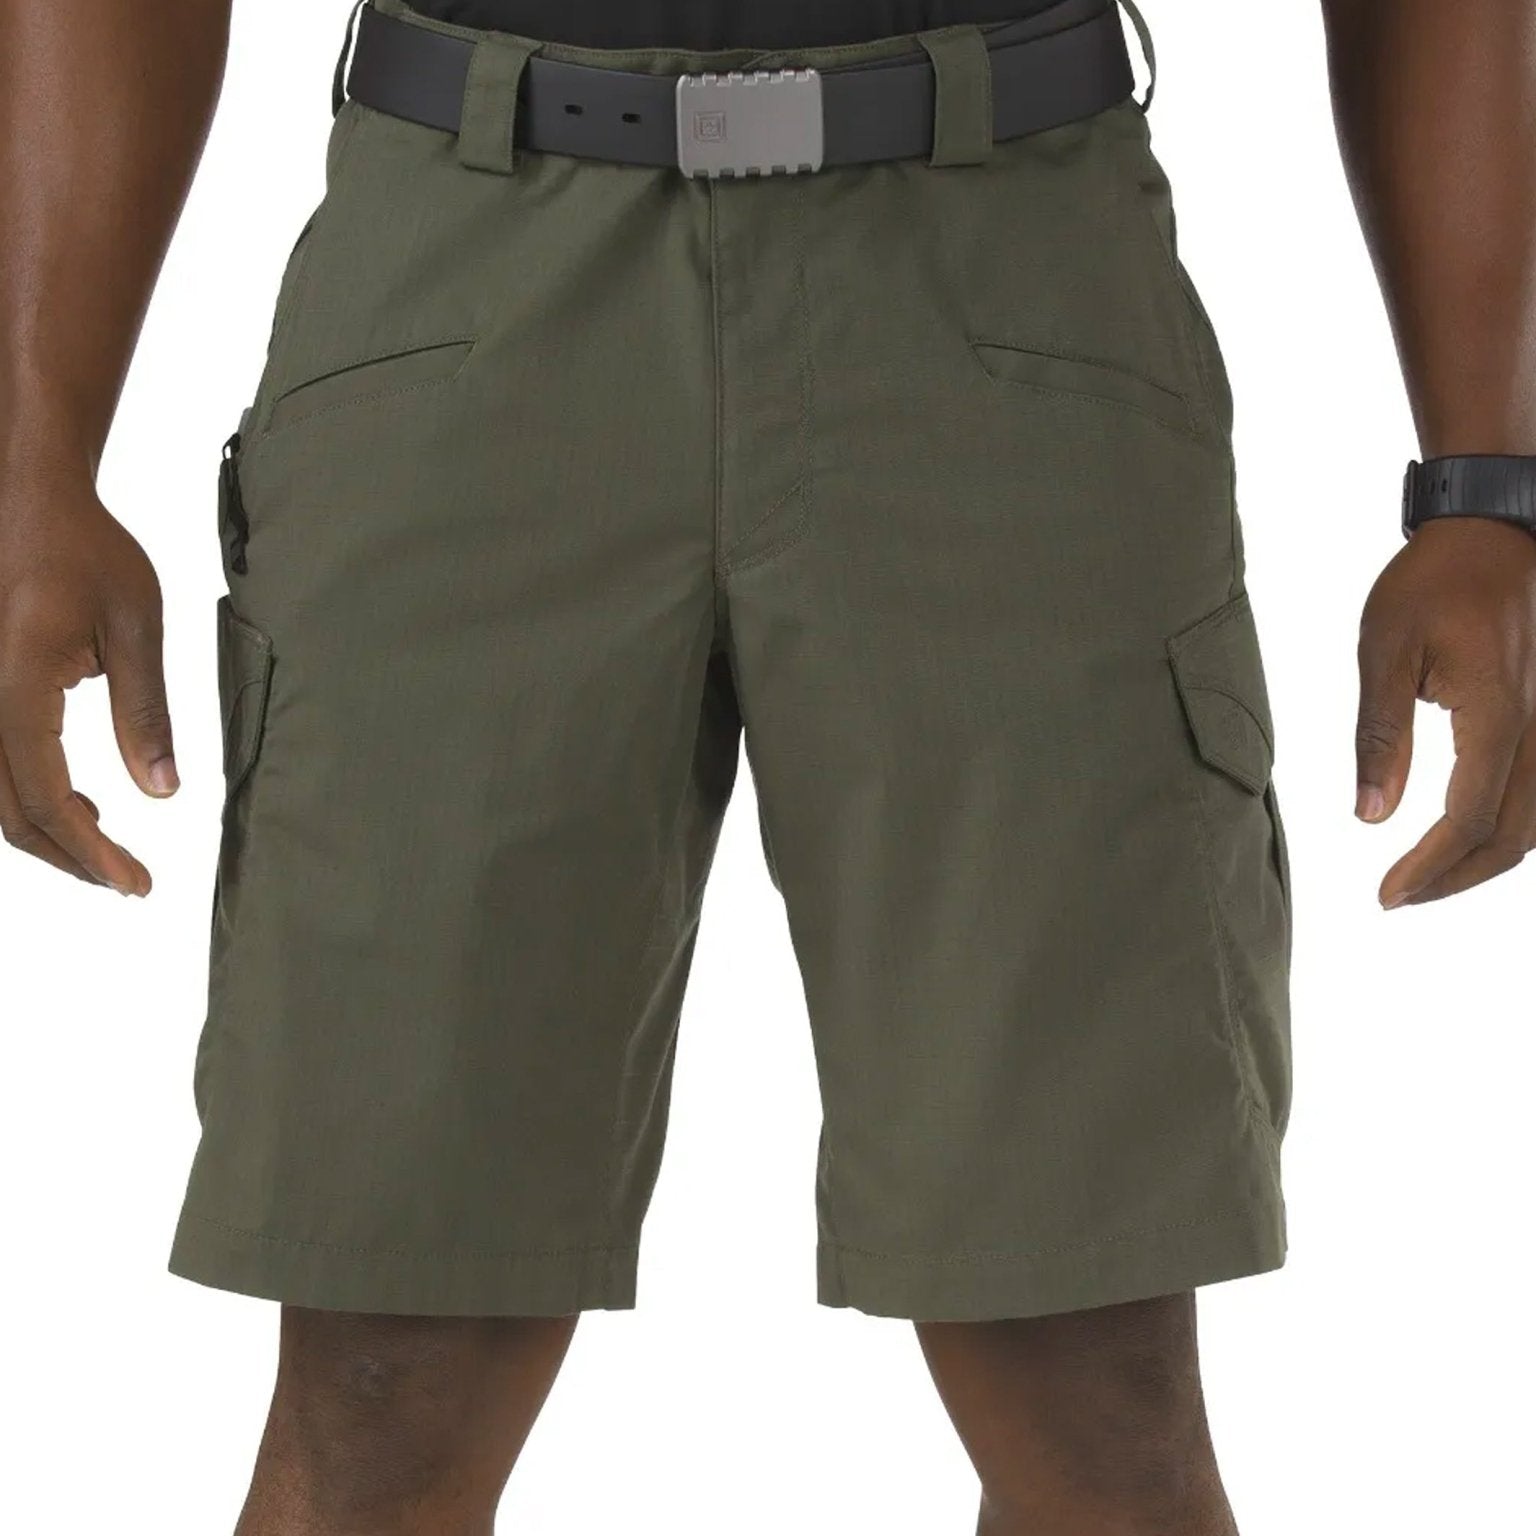 4elementsclothing5.11 Tactical5.11 Tactical - 5.11 Stryke Short - Mens Stryke 11" shorts Teflon finished, Ripstop - Style 73327Trousers & Jeans73327-192-30